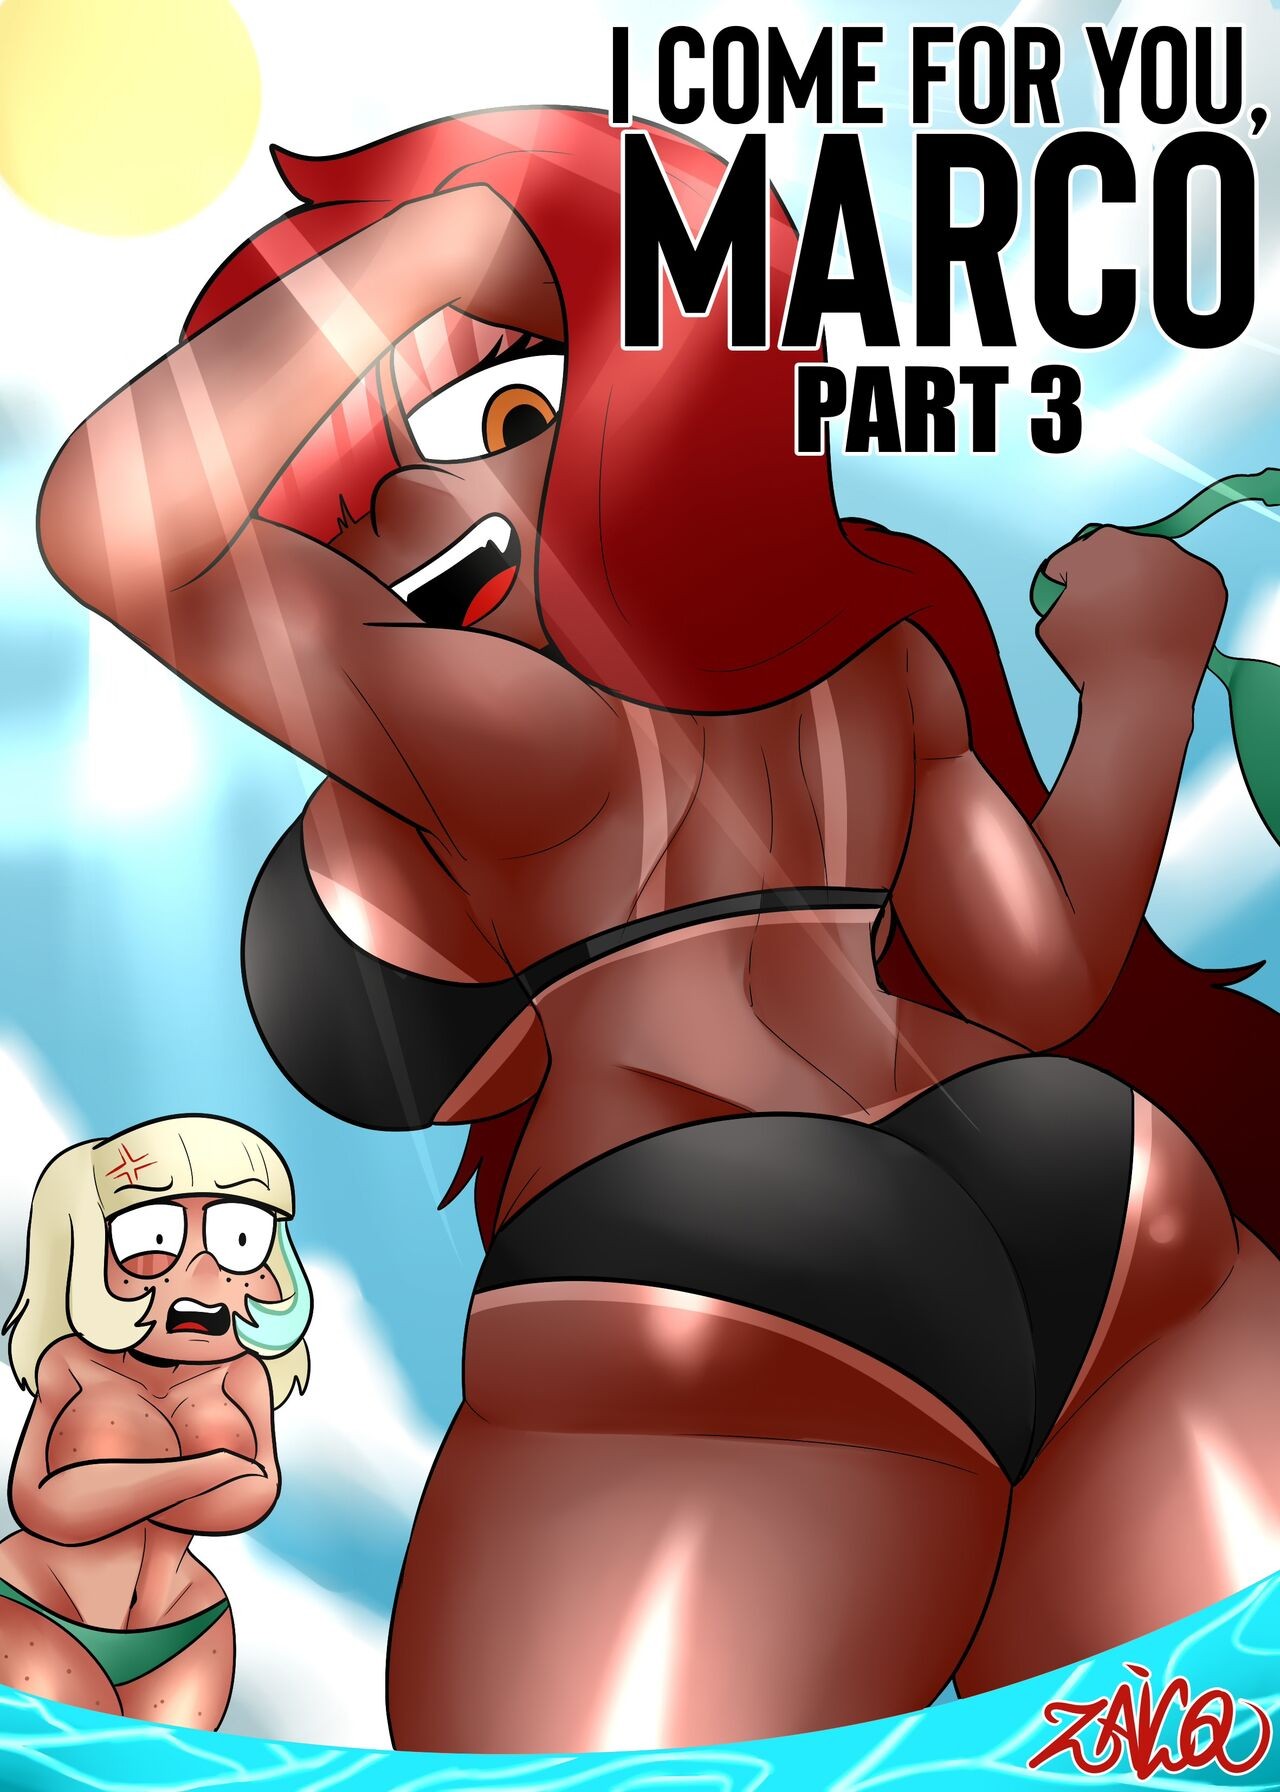 I Come For You, Marco Part 3 Porn Comic english 01